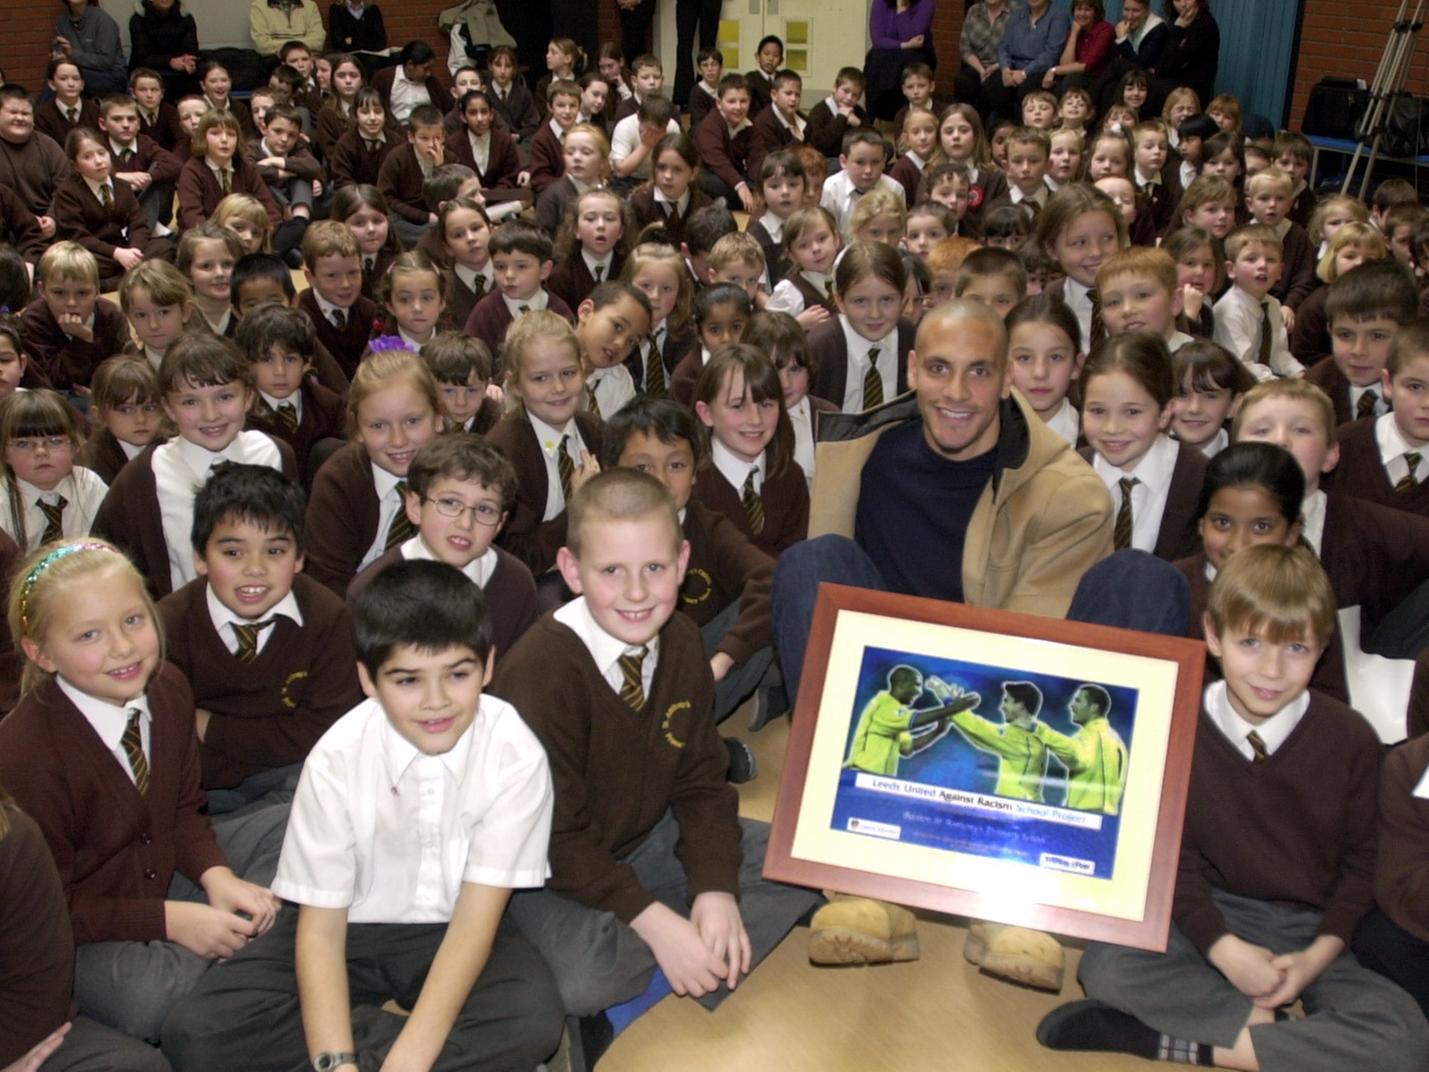 Rio Ferdinand presents the Leeds United Kick Racism Out of Football award to Beeston St. Anthony's Primary School.